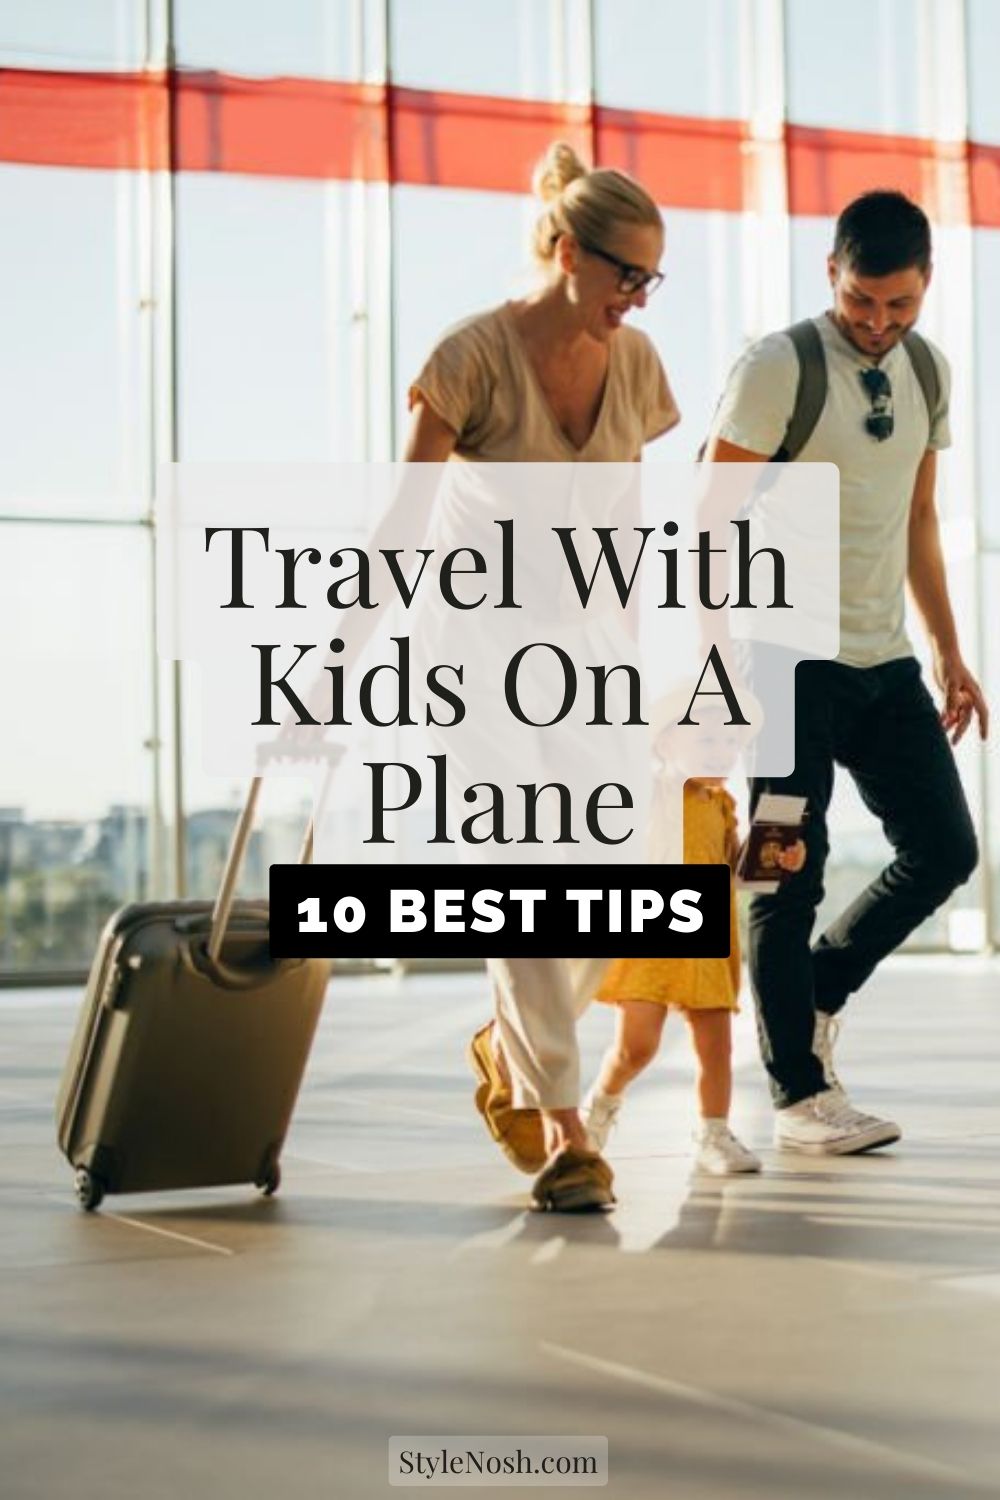 Tips On How To Travel With Kids On A Plane